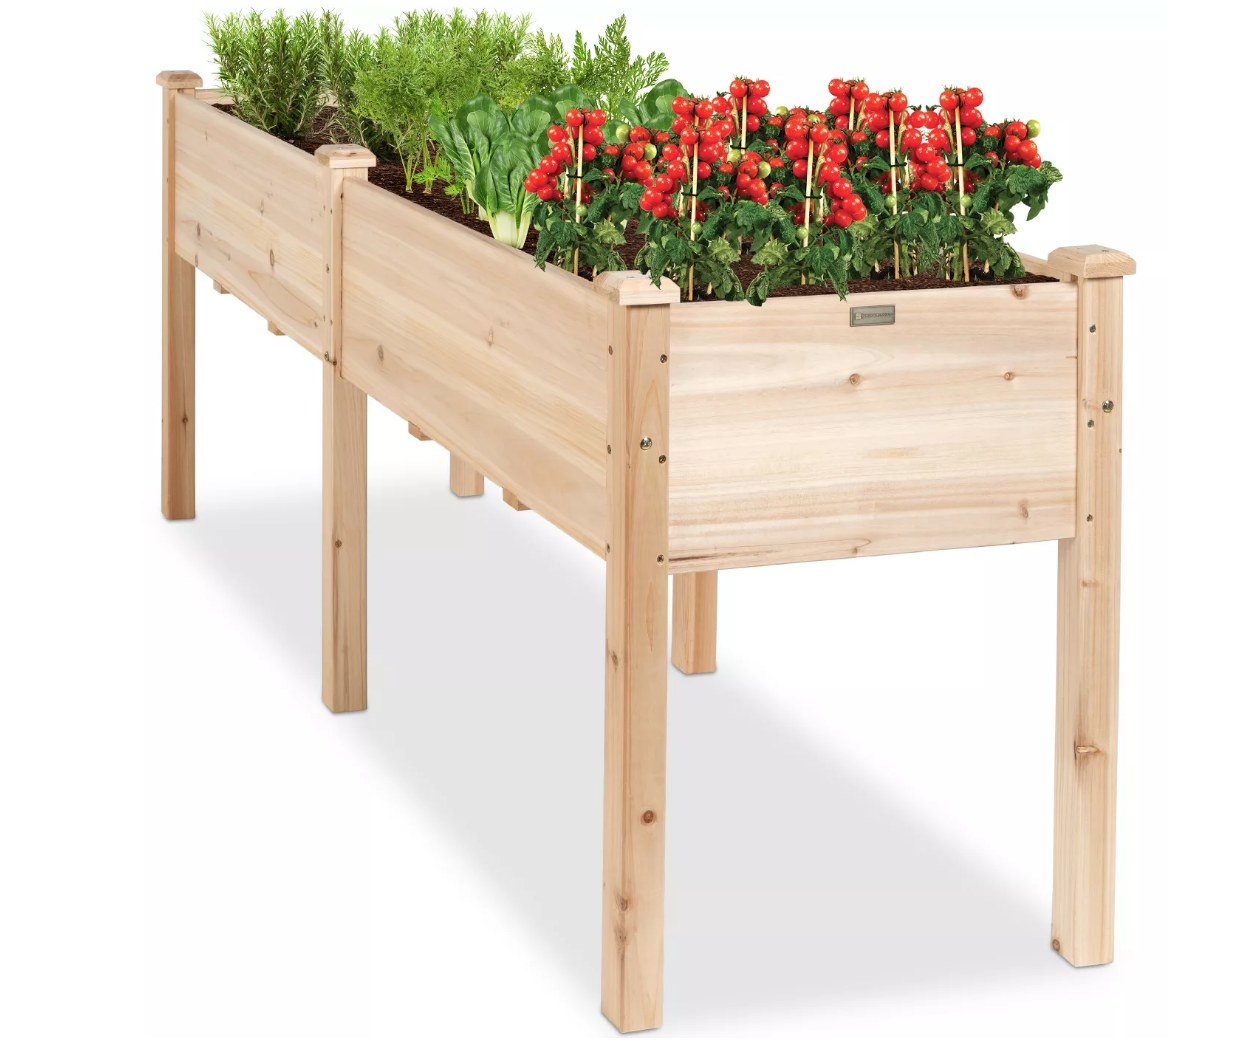 An elevated, wooden planter filled with flowers and herbs